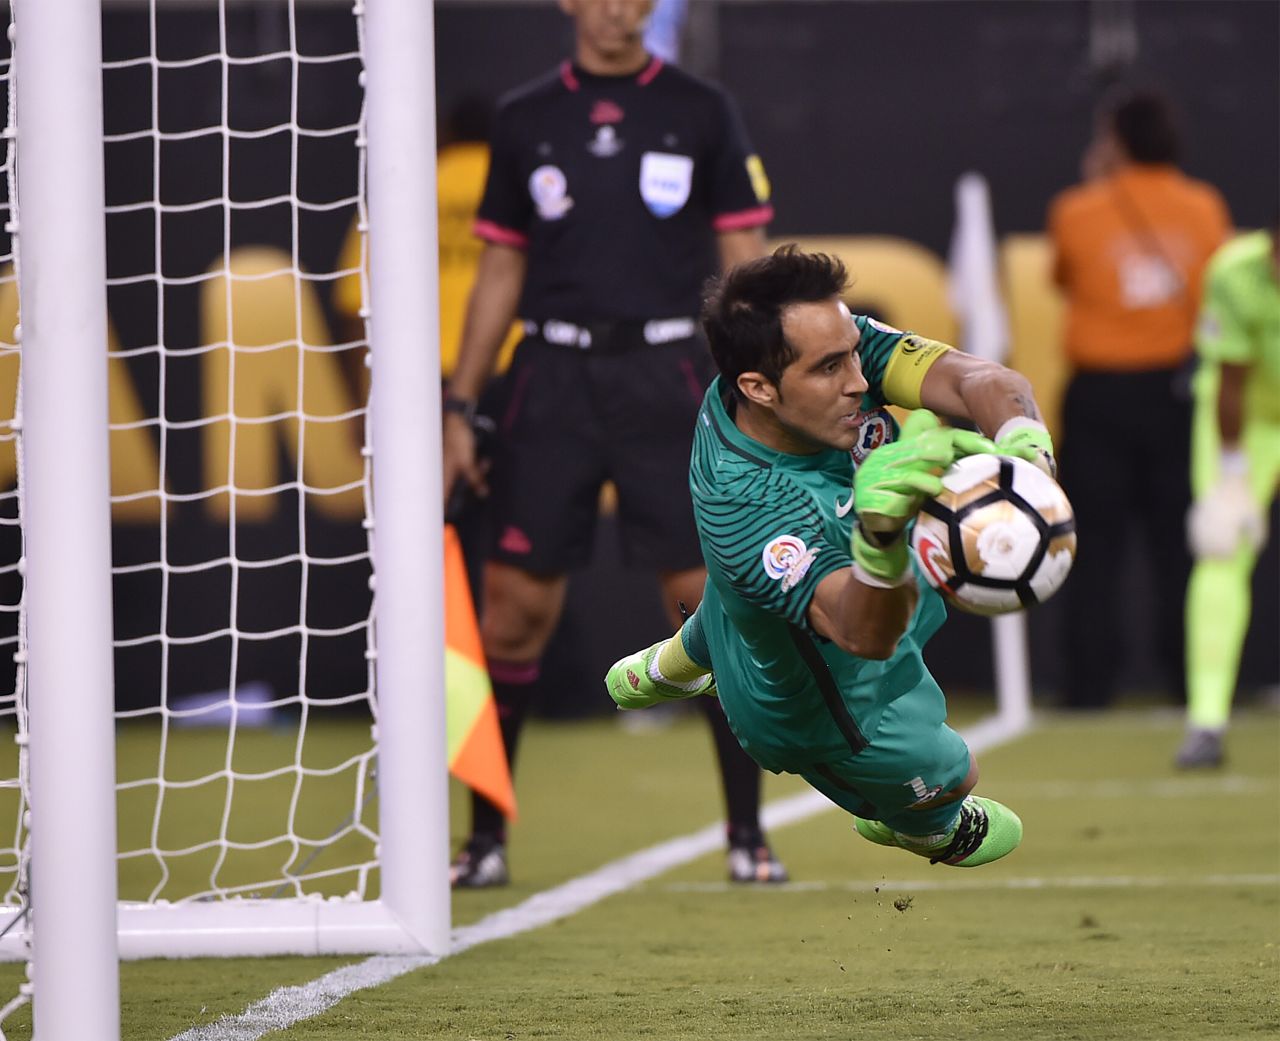 Chile's goalie Claudio Bravo stops a shot by Argentina's Lucas Biglia (out of frame).